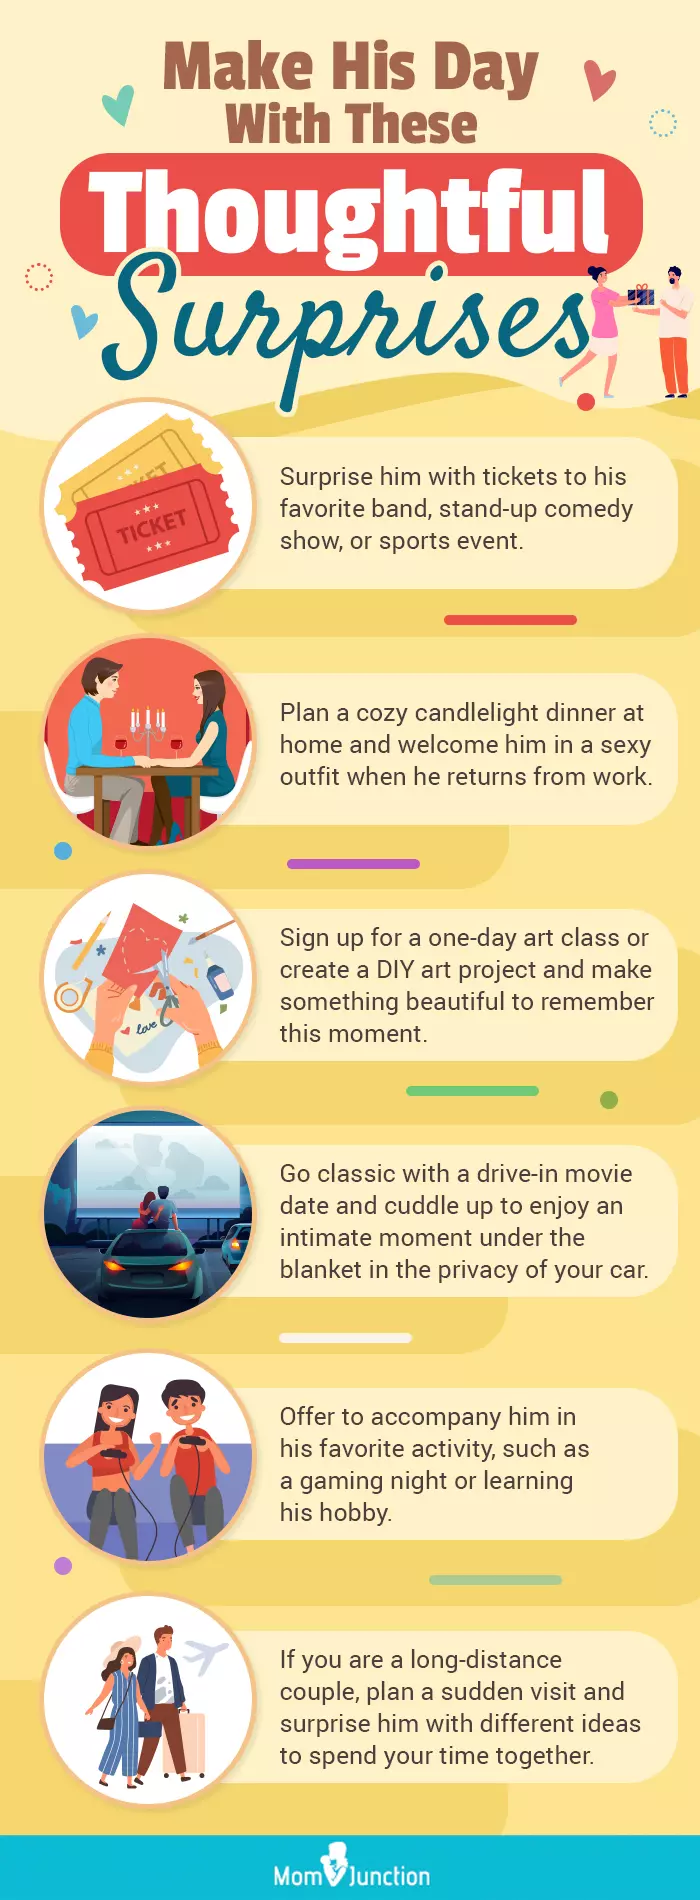 make his day with these thoughtful surprises (infographic)